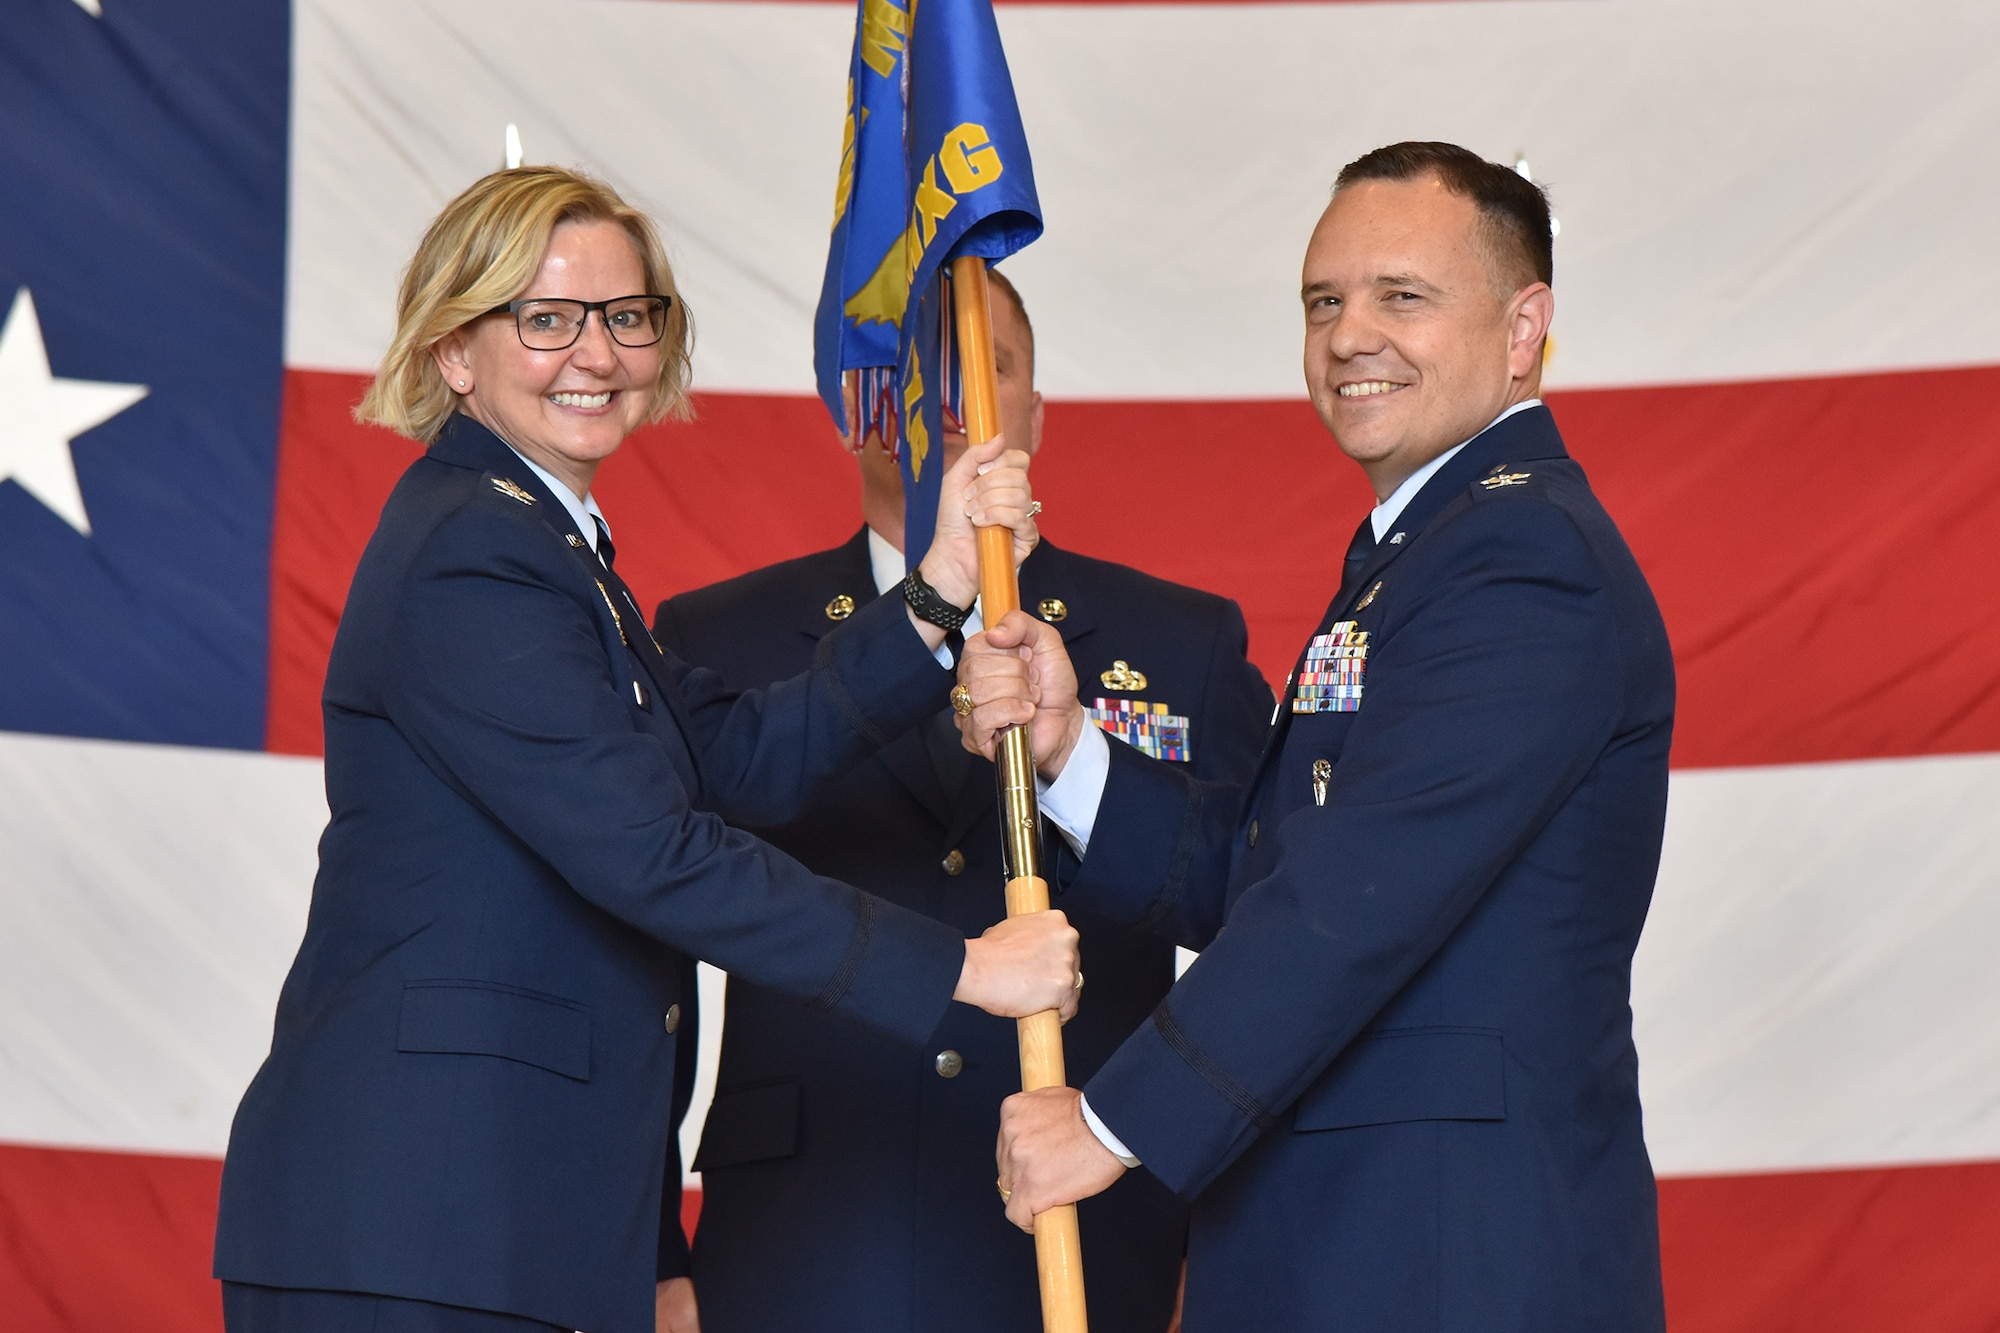 Col. Nathan Mitchell, right, accepts command of the 341st Maintenance Group from Col. Jennifer Reeves, 341st Missile Wing commander, during a change of command ceremony June 12, 2019, at Malmstrom Air Force Base, Mont.